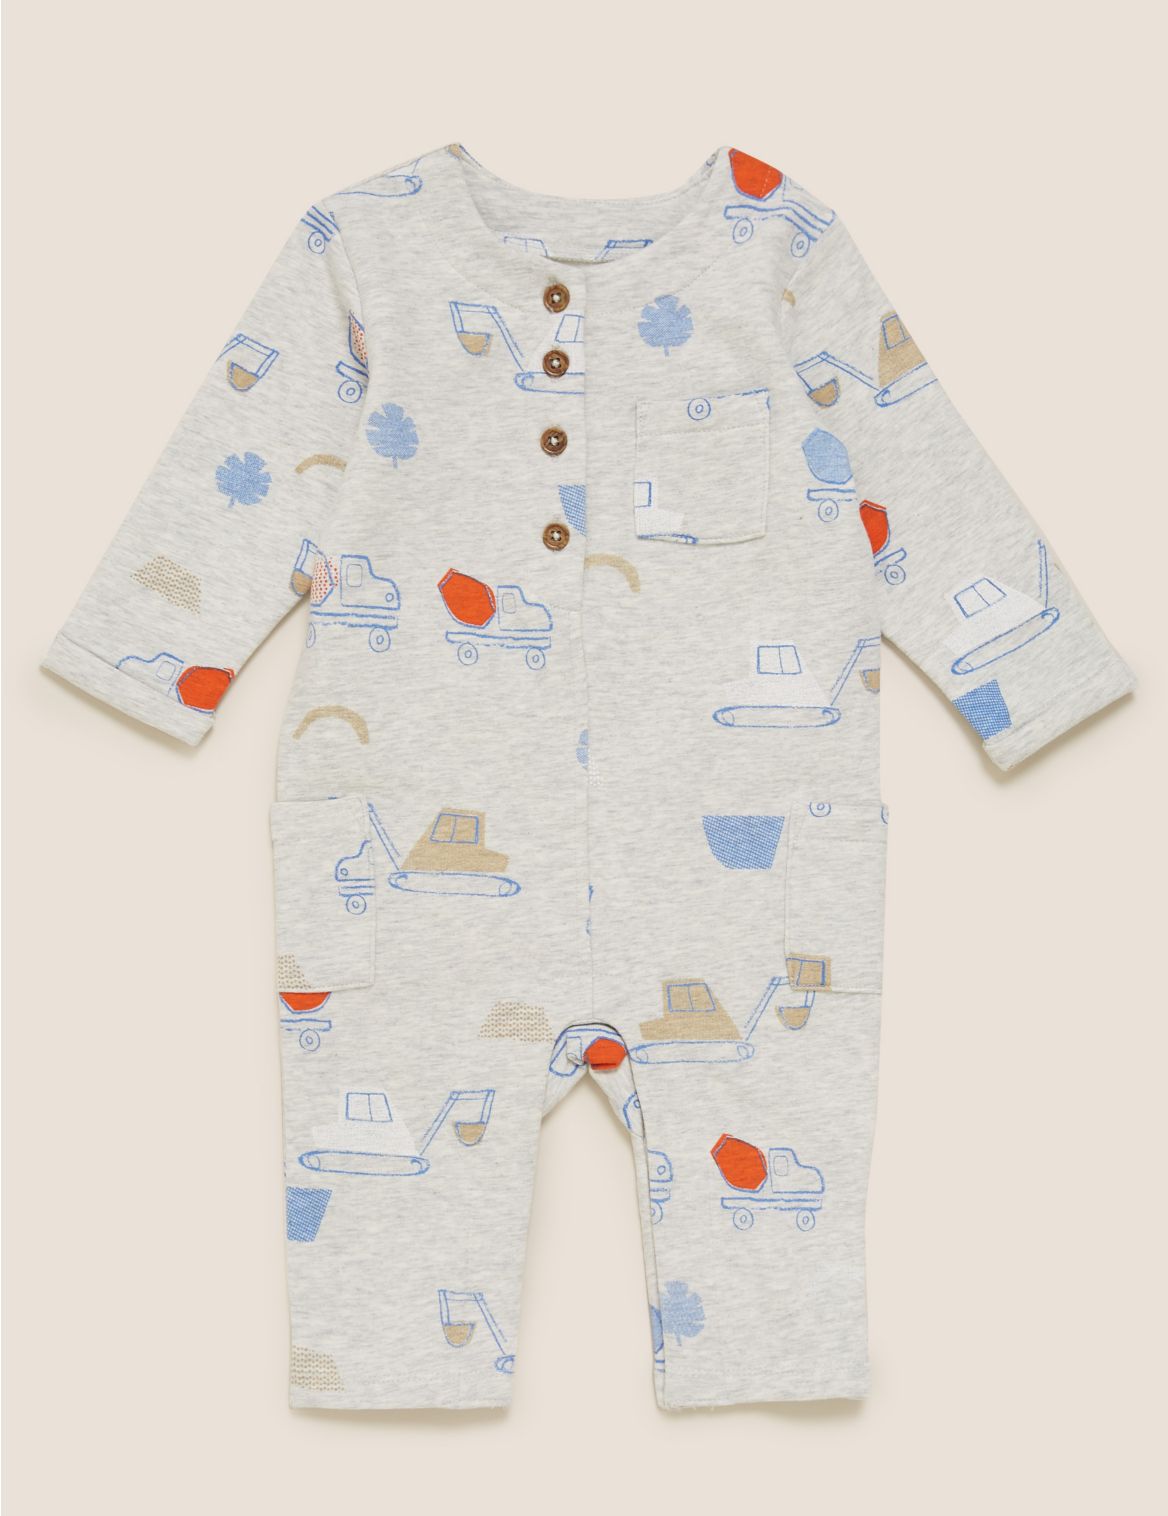 Cotton Transport Print All in One (0-3 Yrs) grey